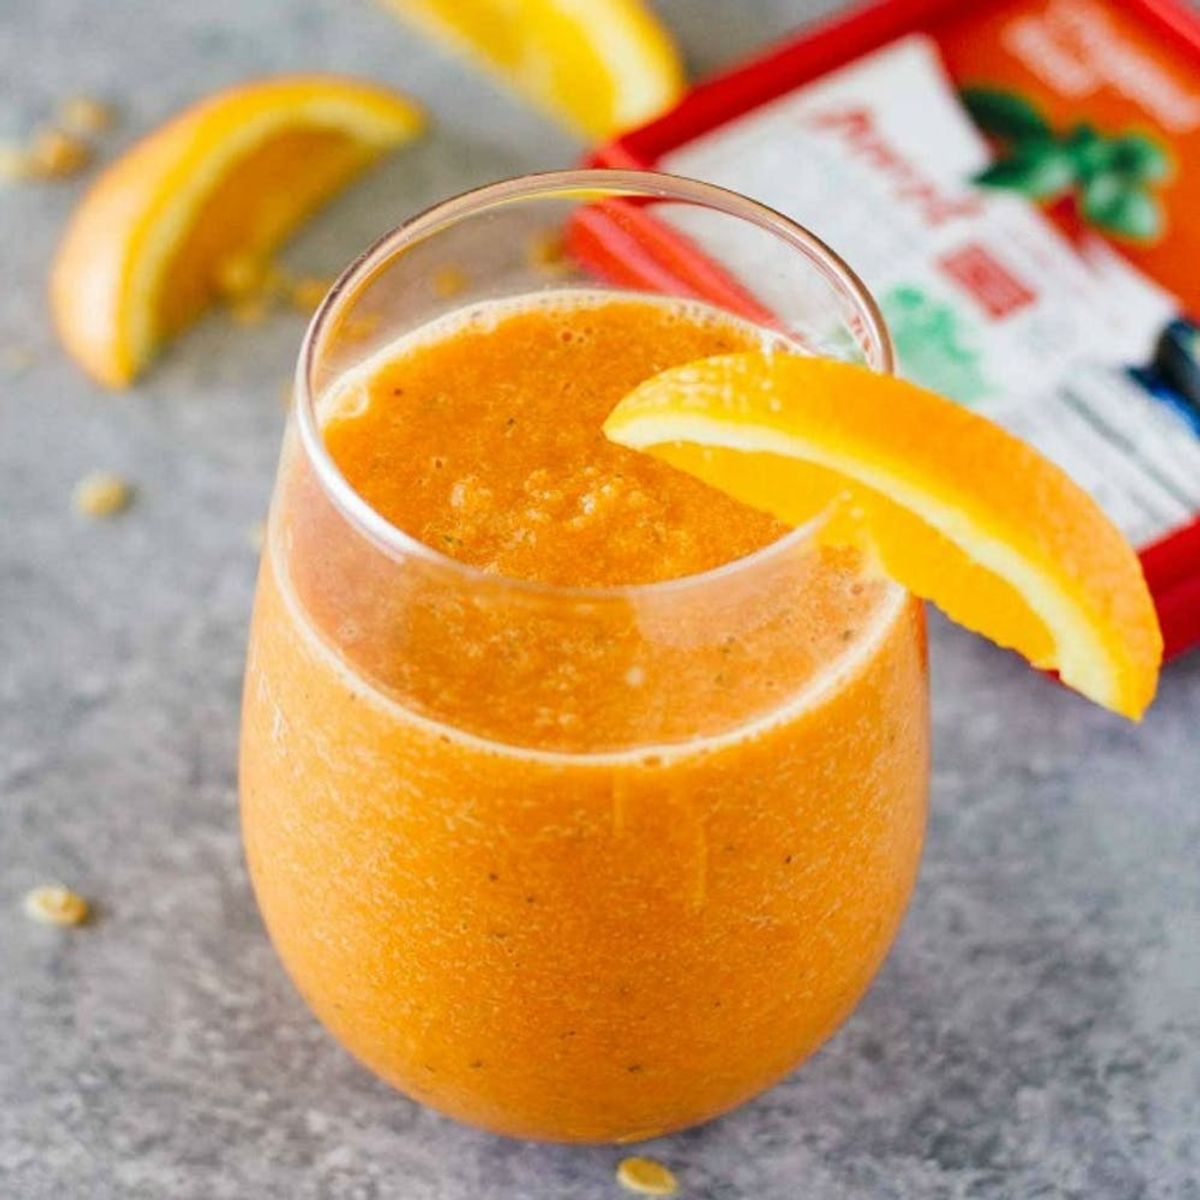 15 Breakfast Smoothie Recipes to Sip in the Summer Sun